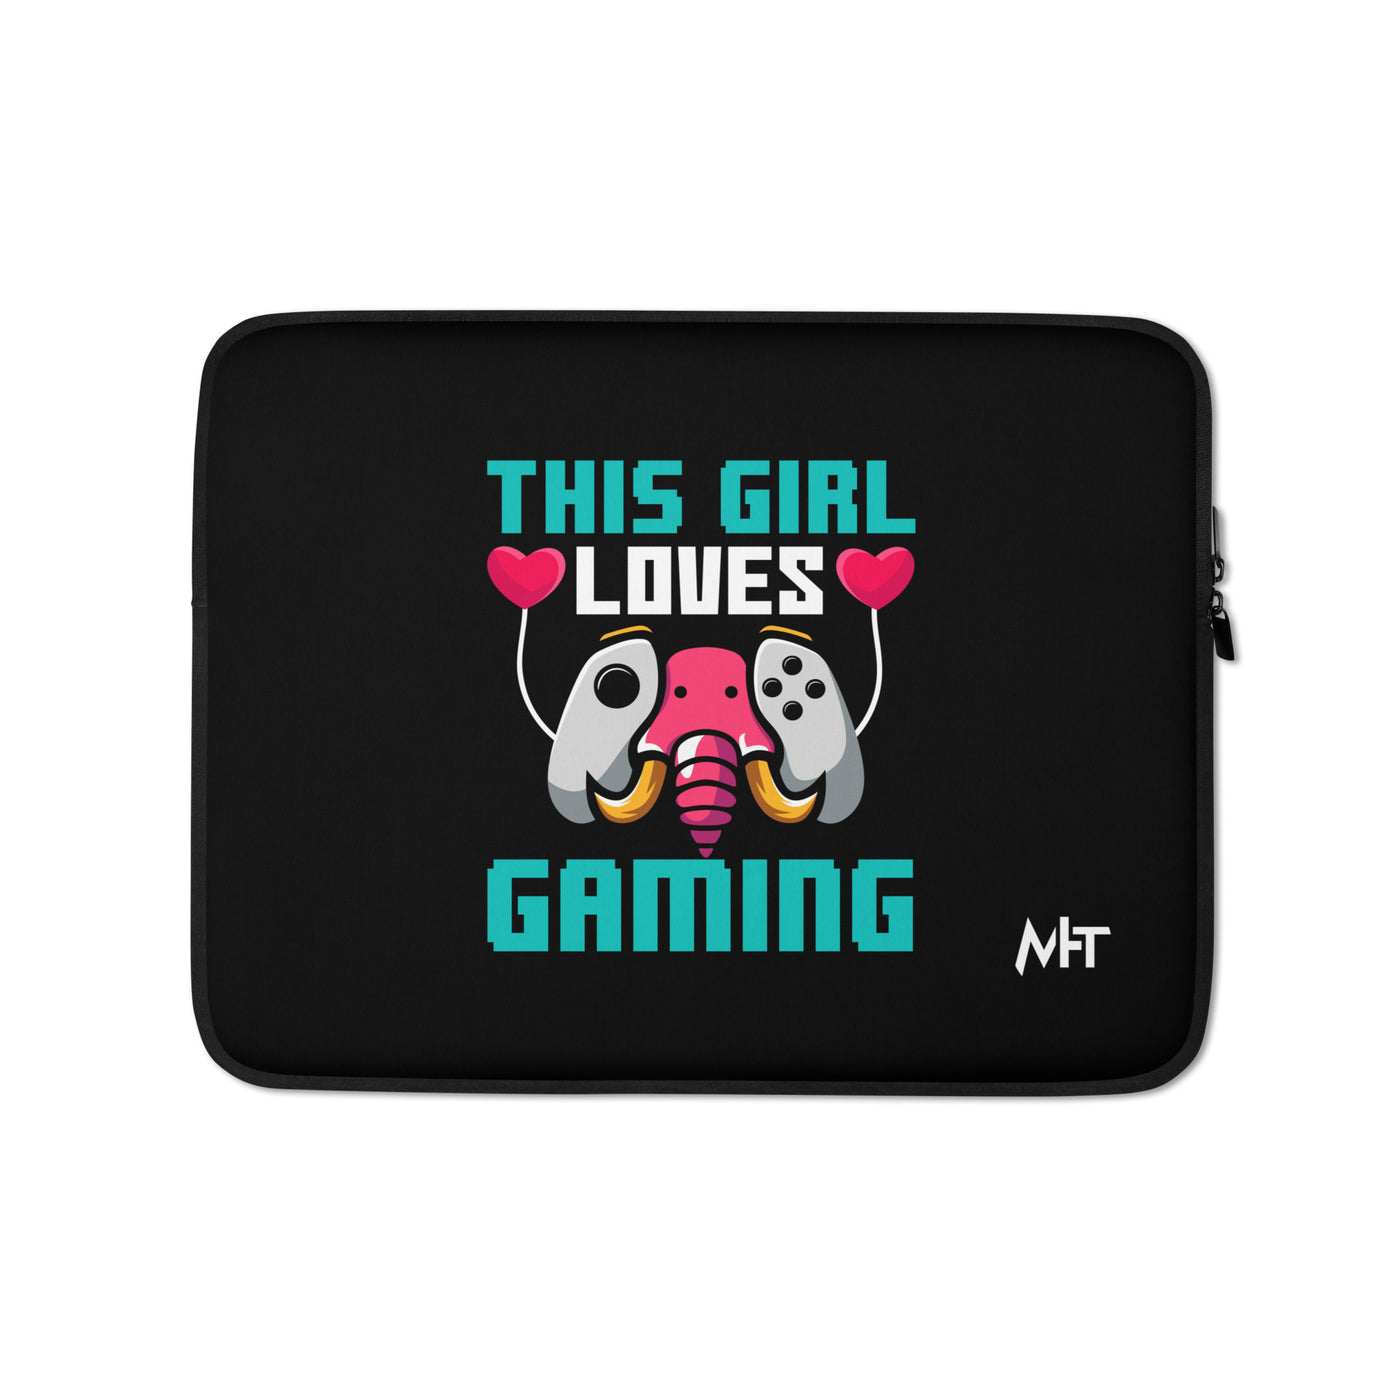 This girl Loves video games ( RiMa ) - Laptop Sleeve